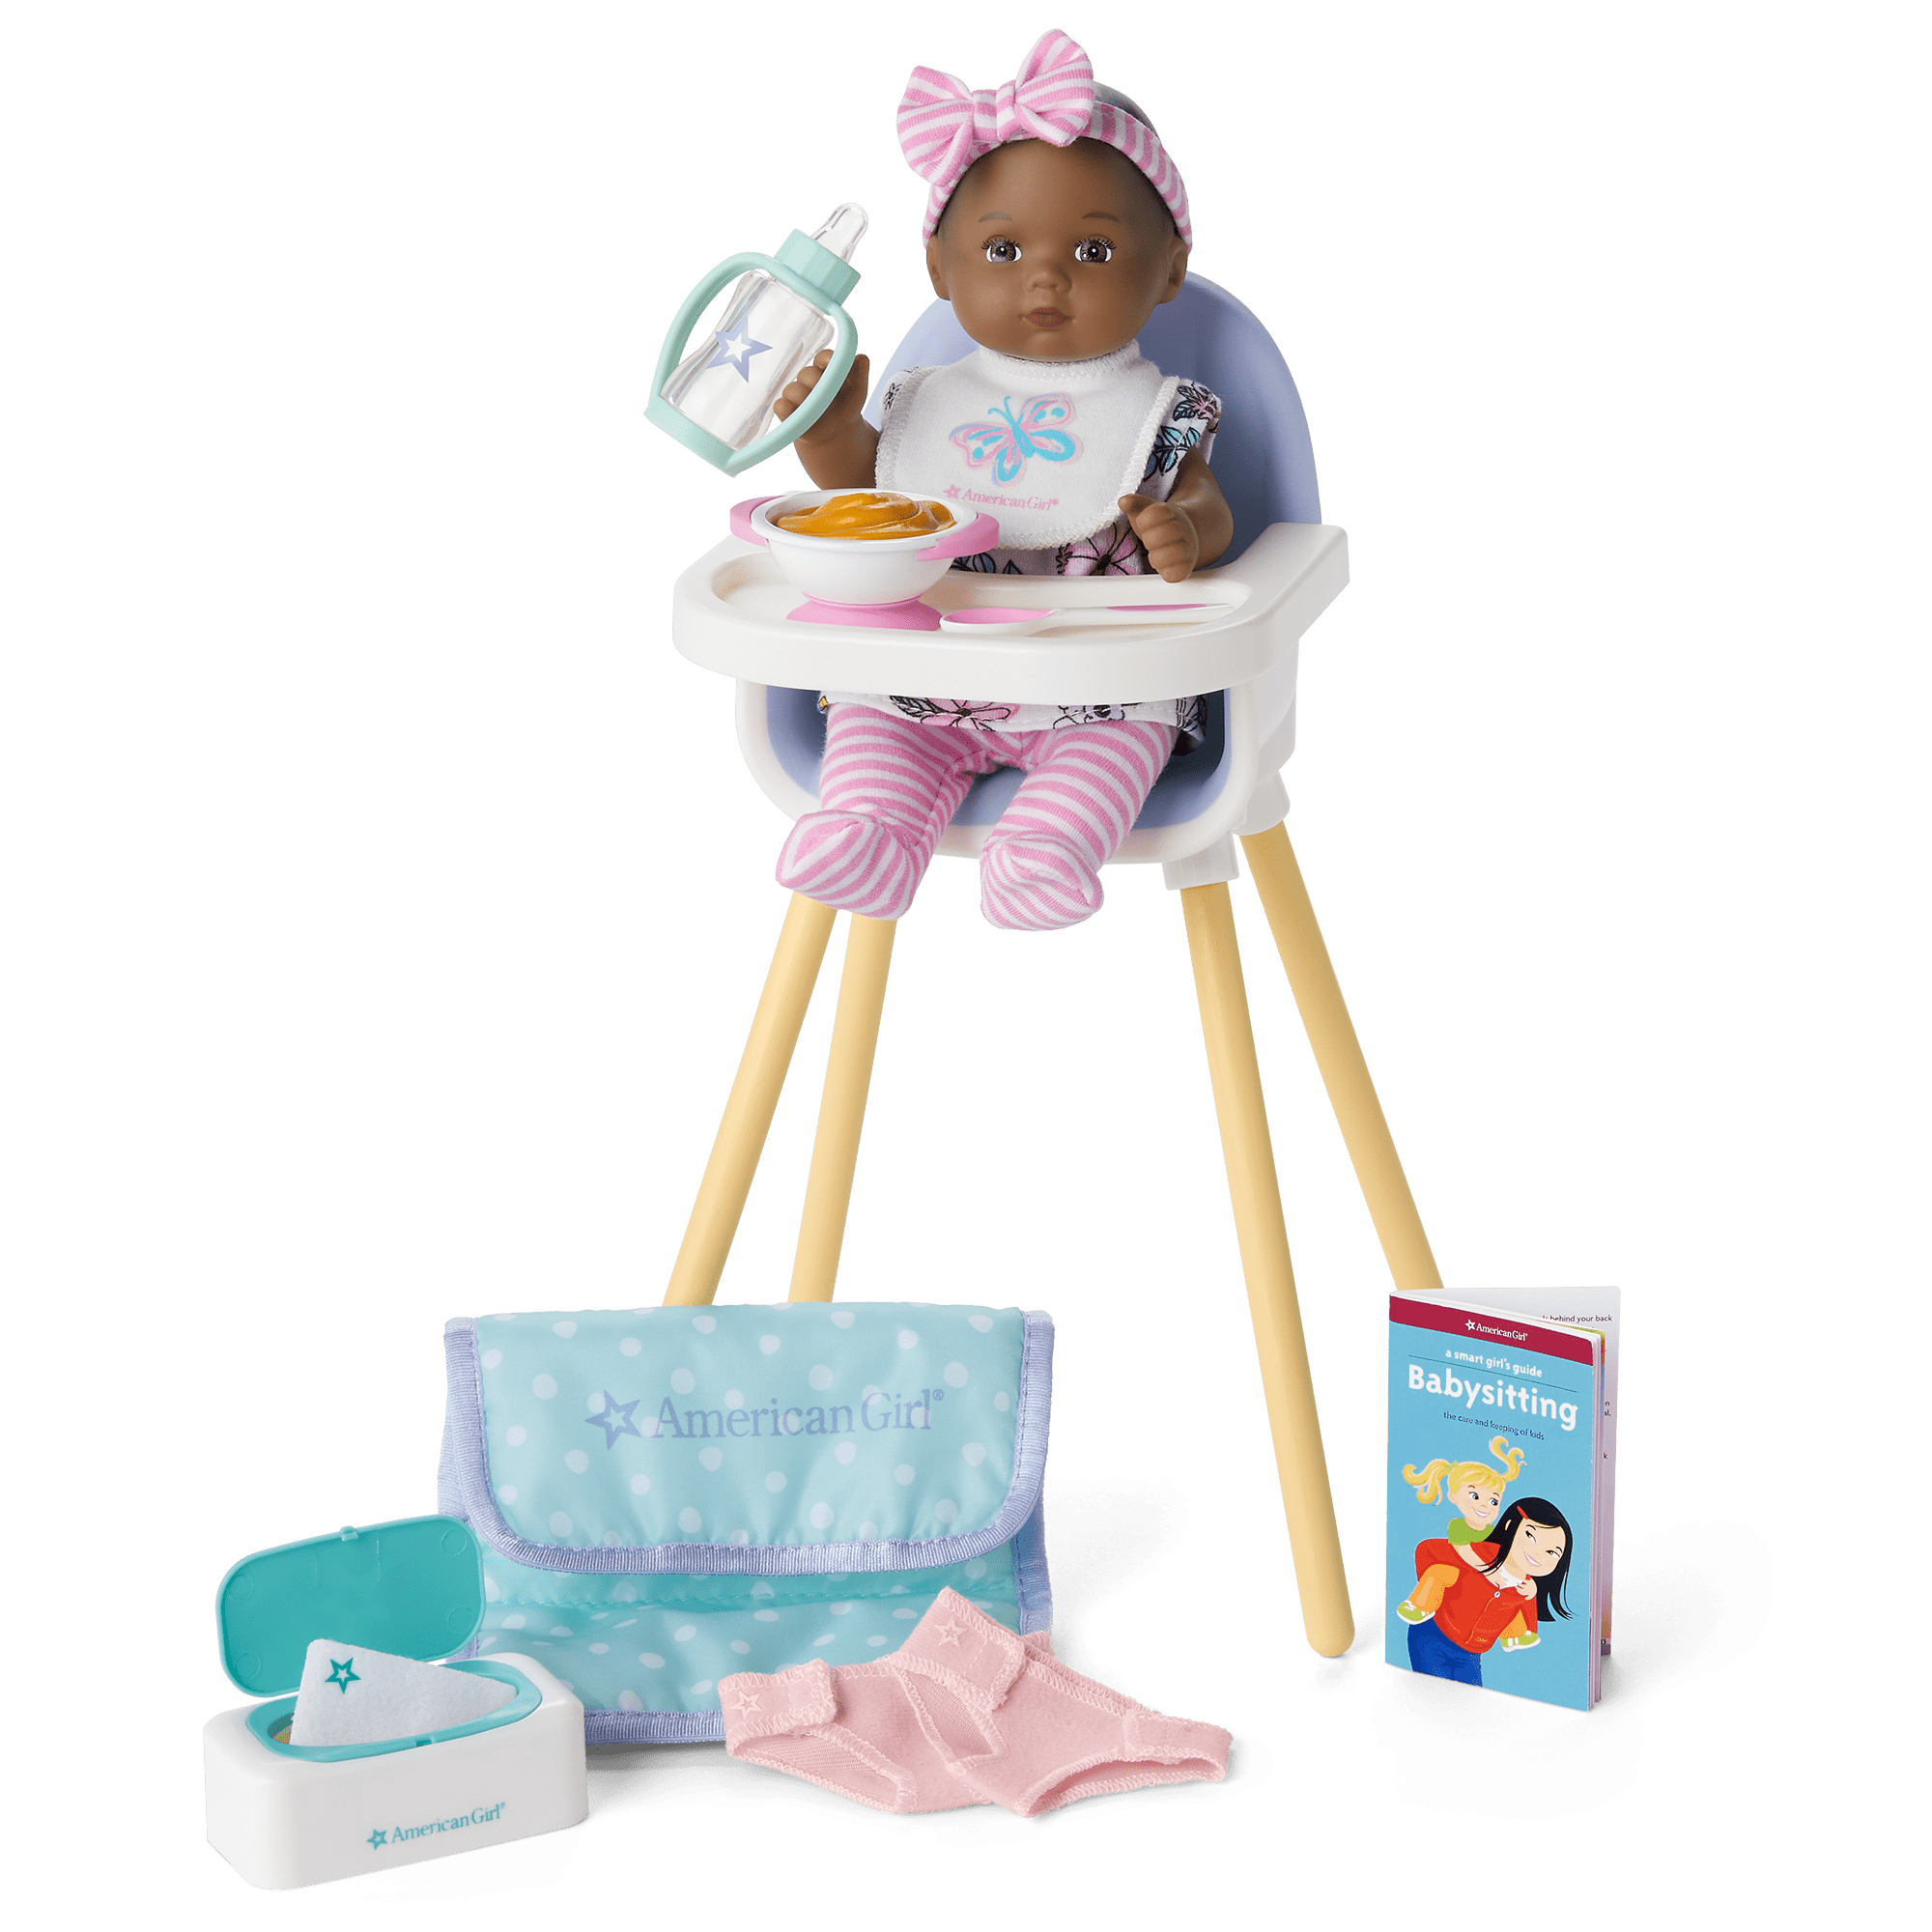 Caring for Baby Set for 18-inch Dolls